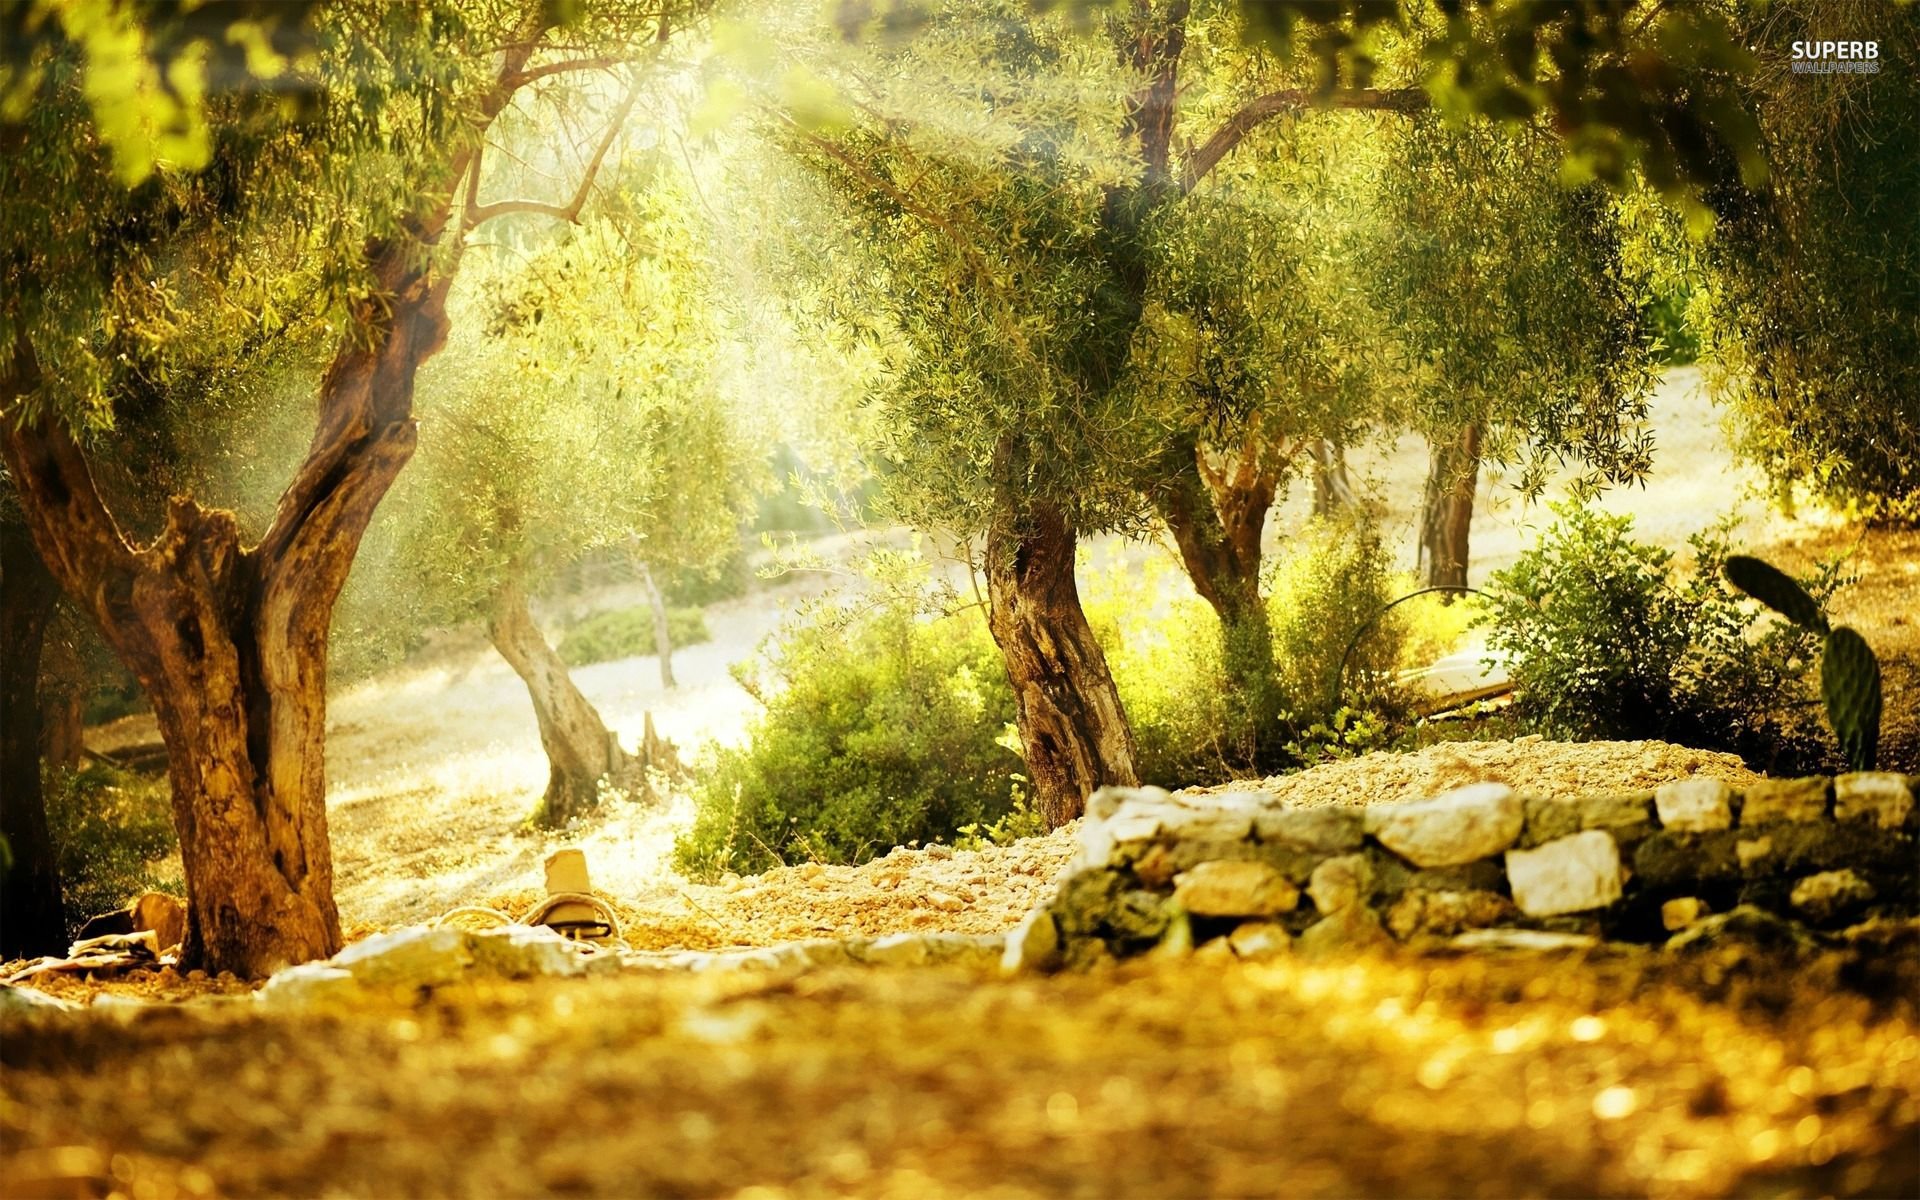 Sunny Park Wallpaper - Nature Background Images Photoshop , HD Wallpaper & Backgrounds